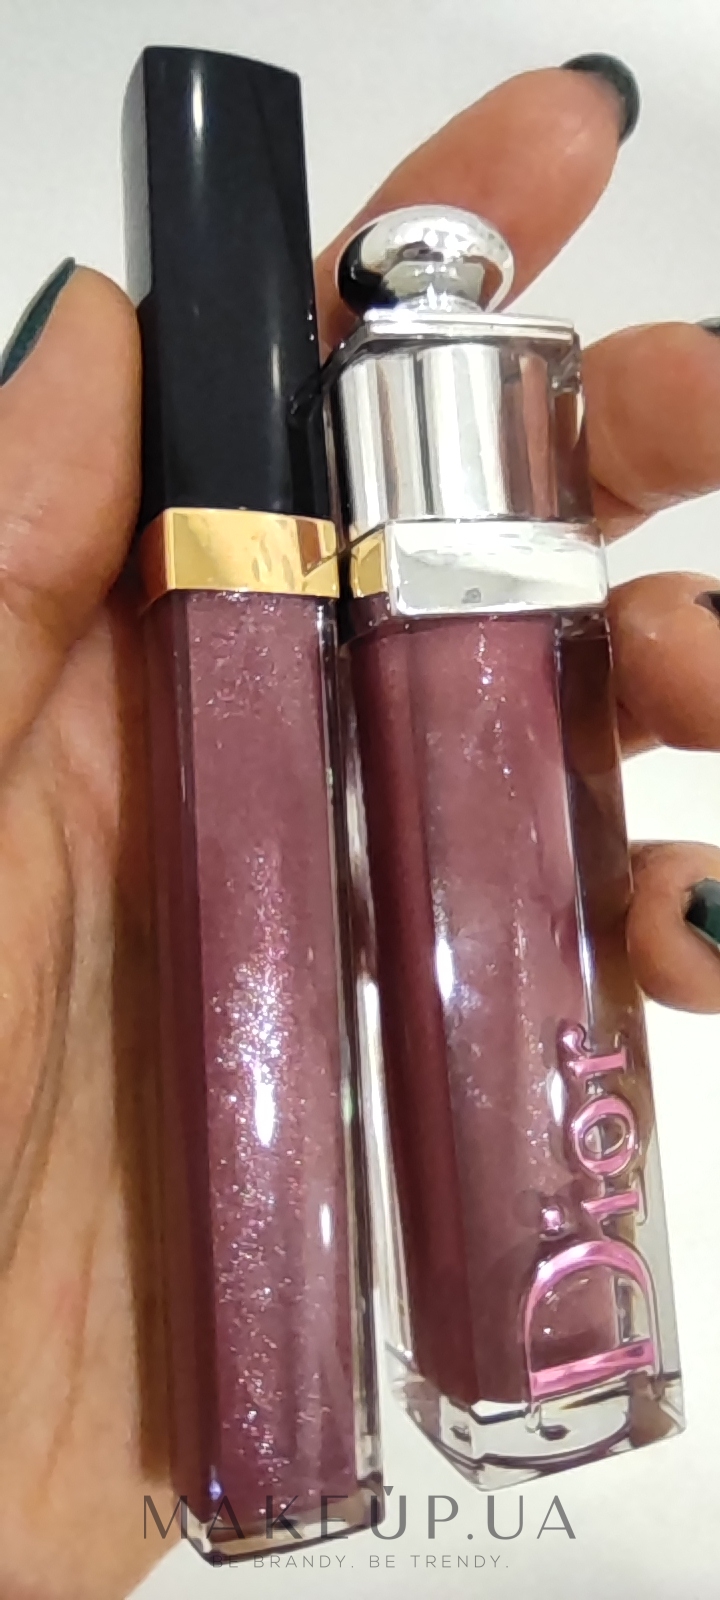 CHANEL ROUGE COCO GLOSS 119 BOURGEOISIE 187002855, Beauty & Personal Care,  Face, Makeup on Carousell